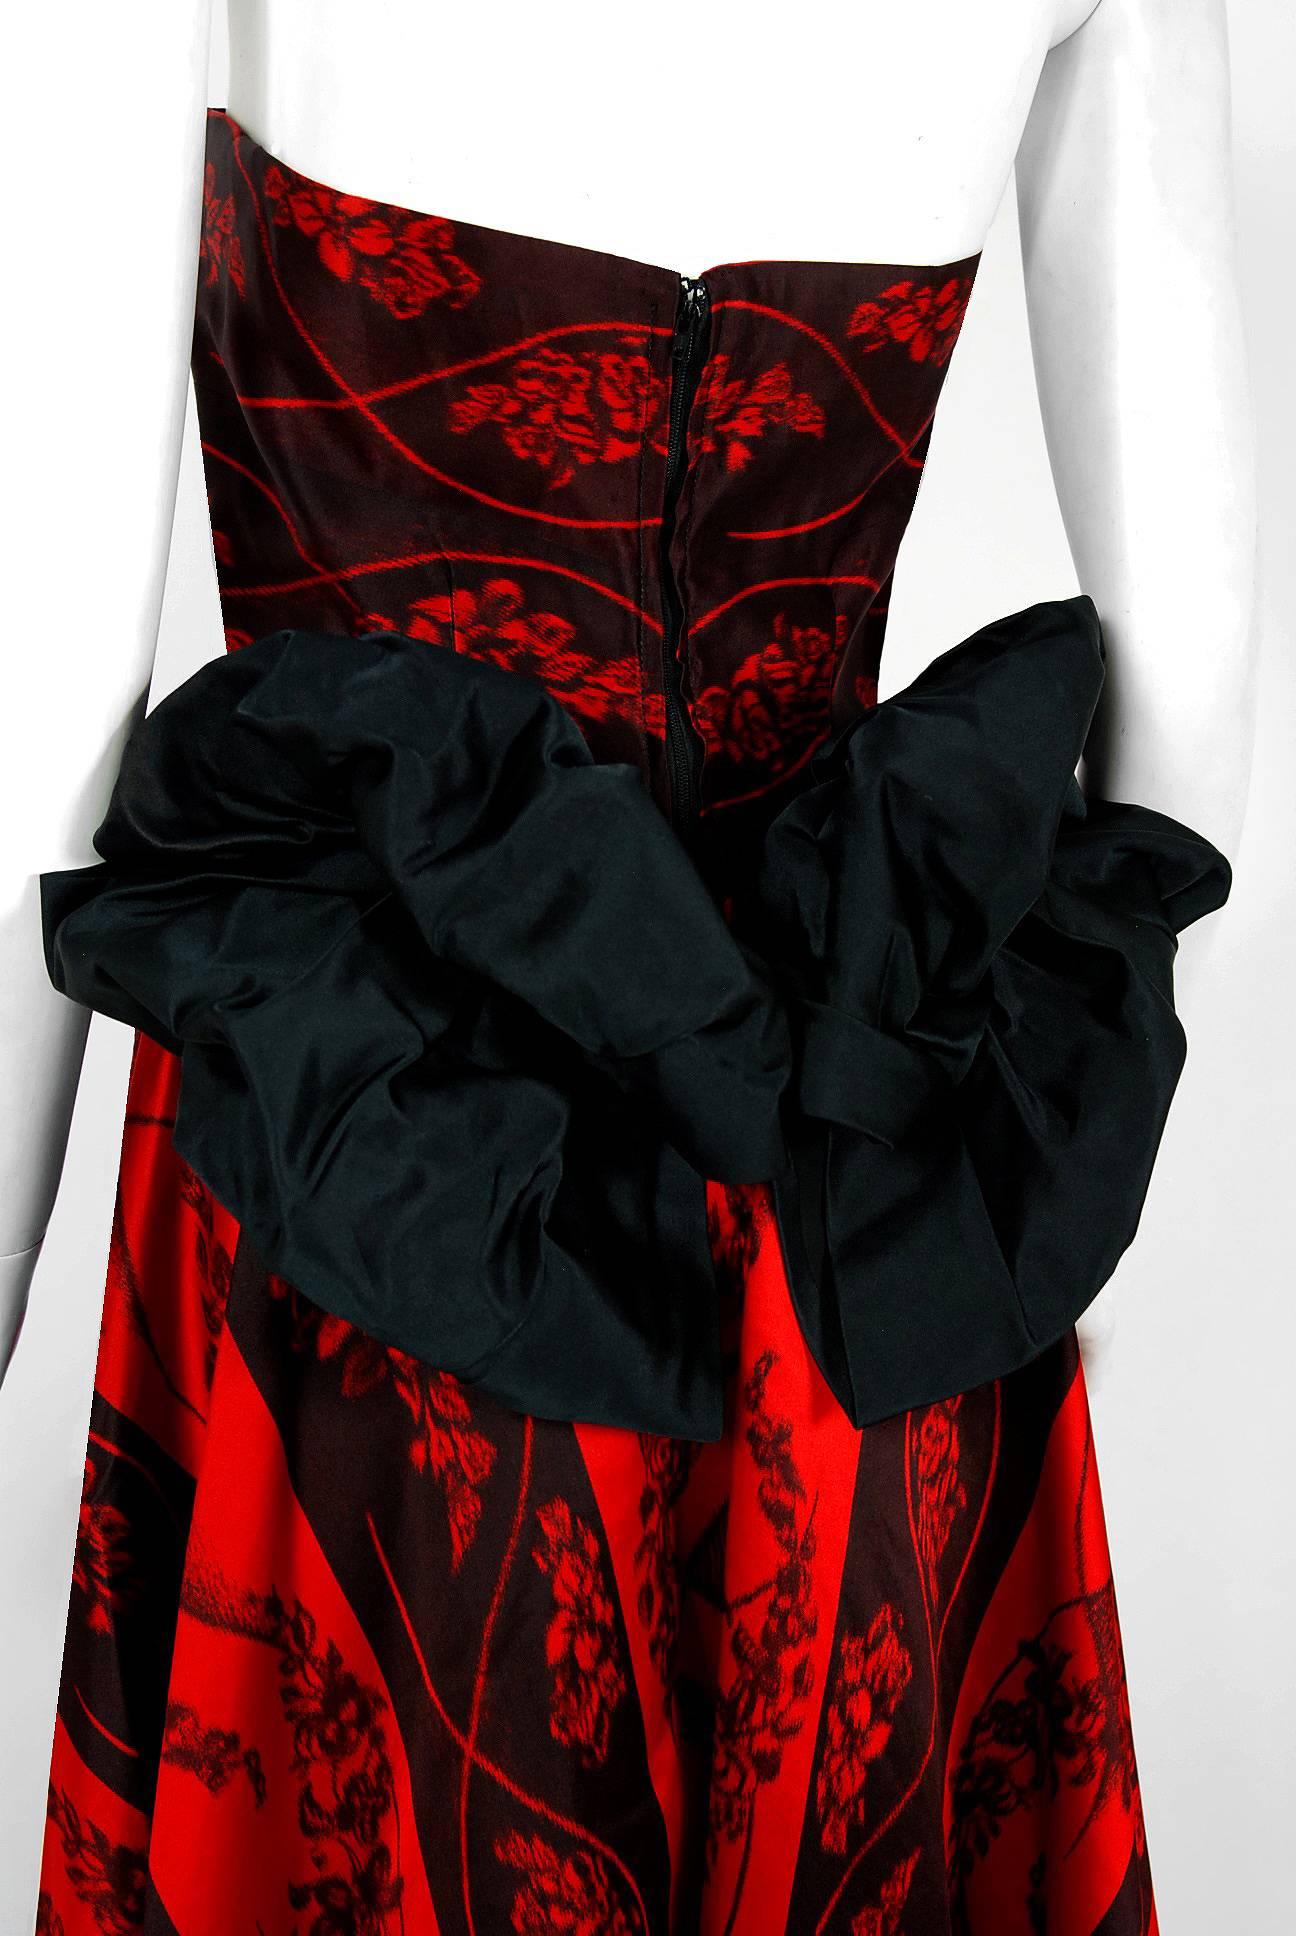 Women's Vintage 1957 Bergdorf Goodman Couture Red Floral Silk Strapless Bustle Gown